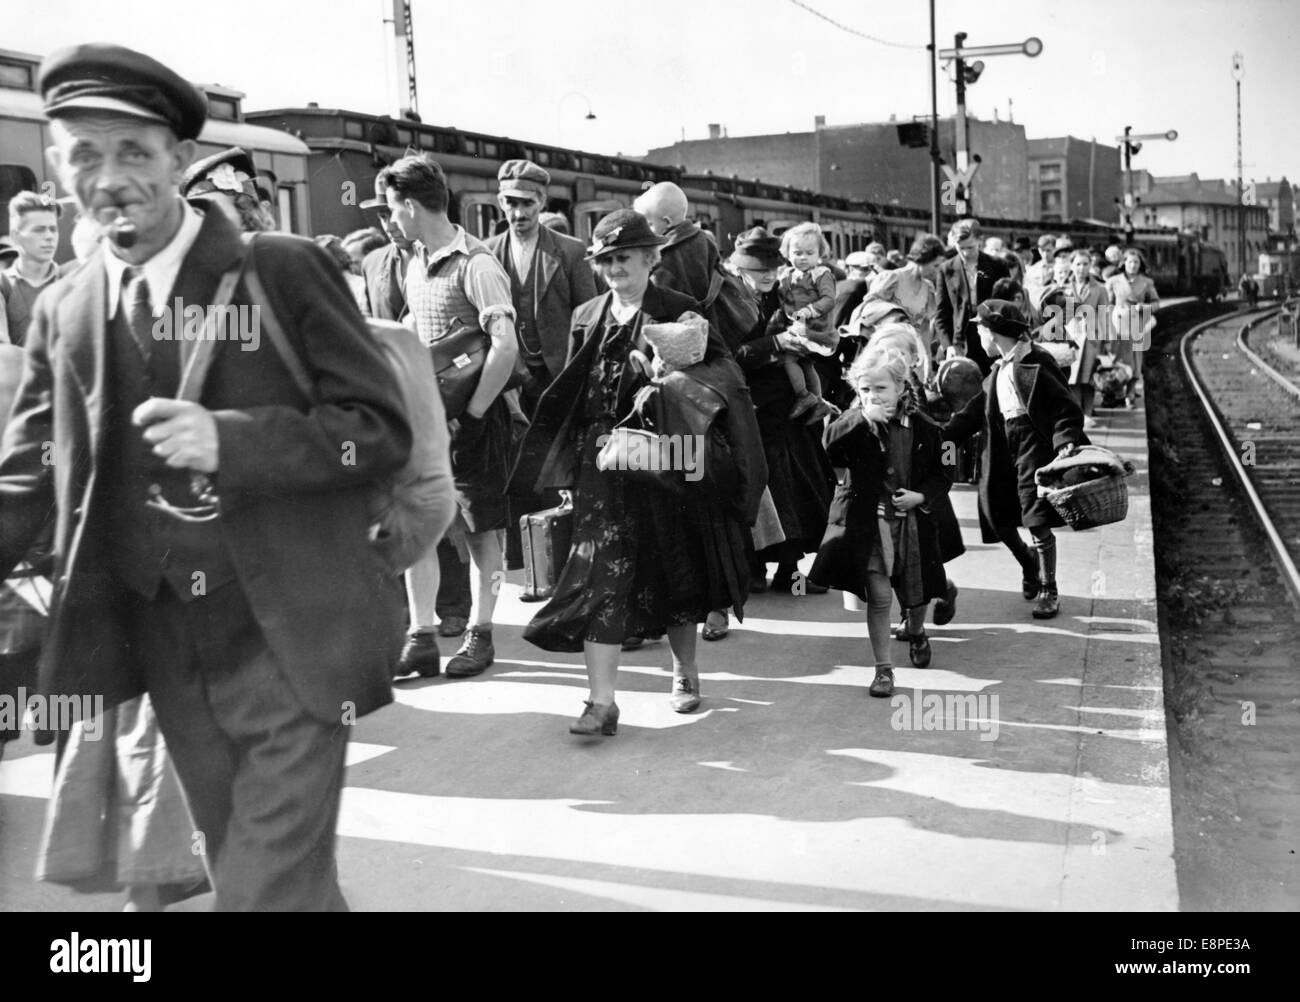 The Nazi propaganda picture shows Volkdeutsch people arriving at Stettin train station in August 1939. The Nazi news report on the back of the picture reads: 'The number of refugees from Poland increases constantly. The arrival of Volksdeutsch refugees at Stettin Station. The Volksdeutsche refugees are cared for immediately upon their arrival.' Fotoarchiv für Zeitgeschichtee - NO WIRE SERVICE Stock Photo